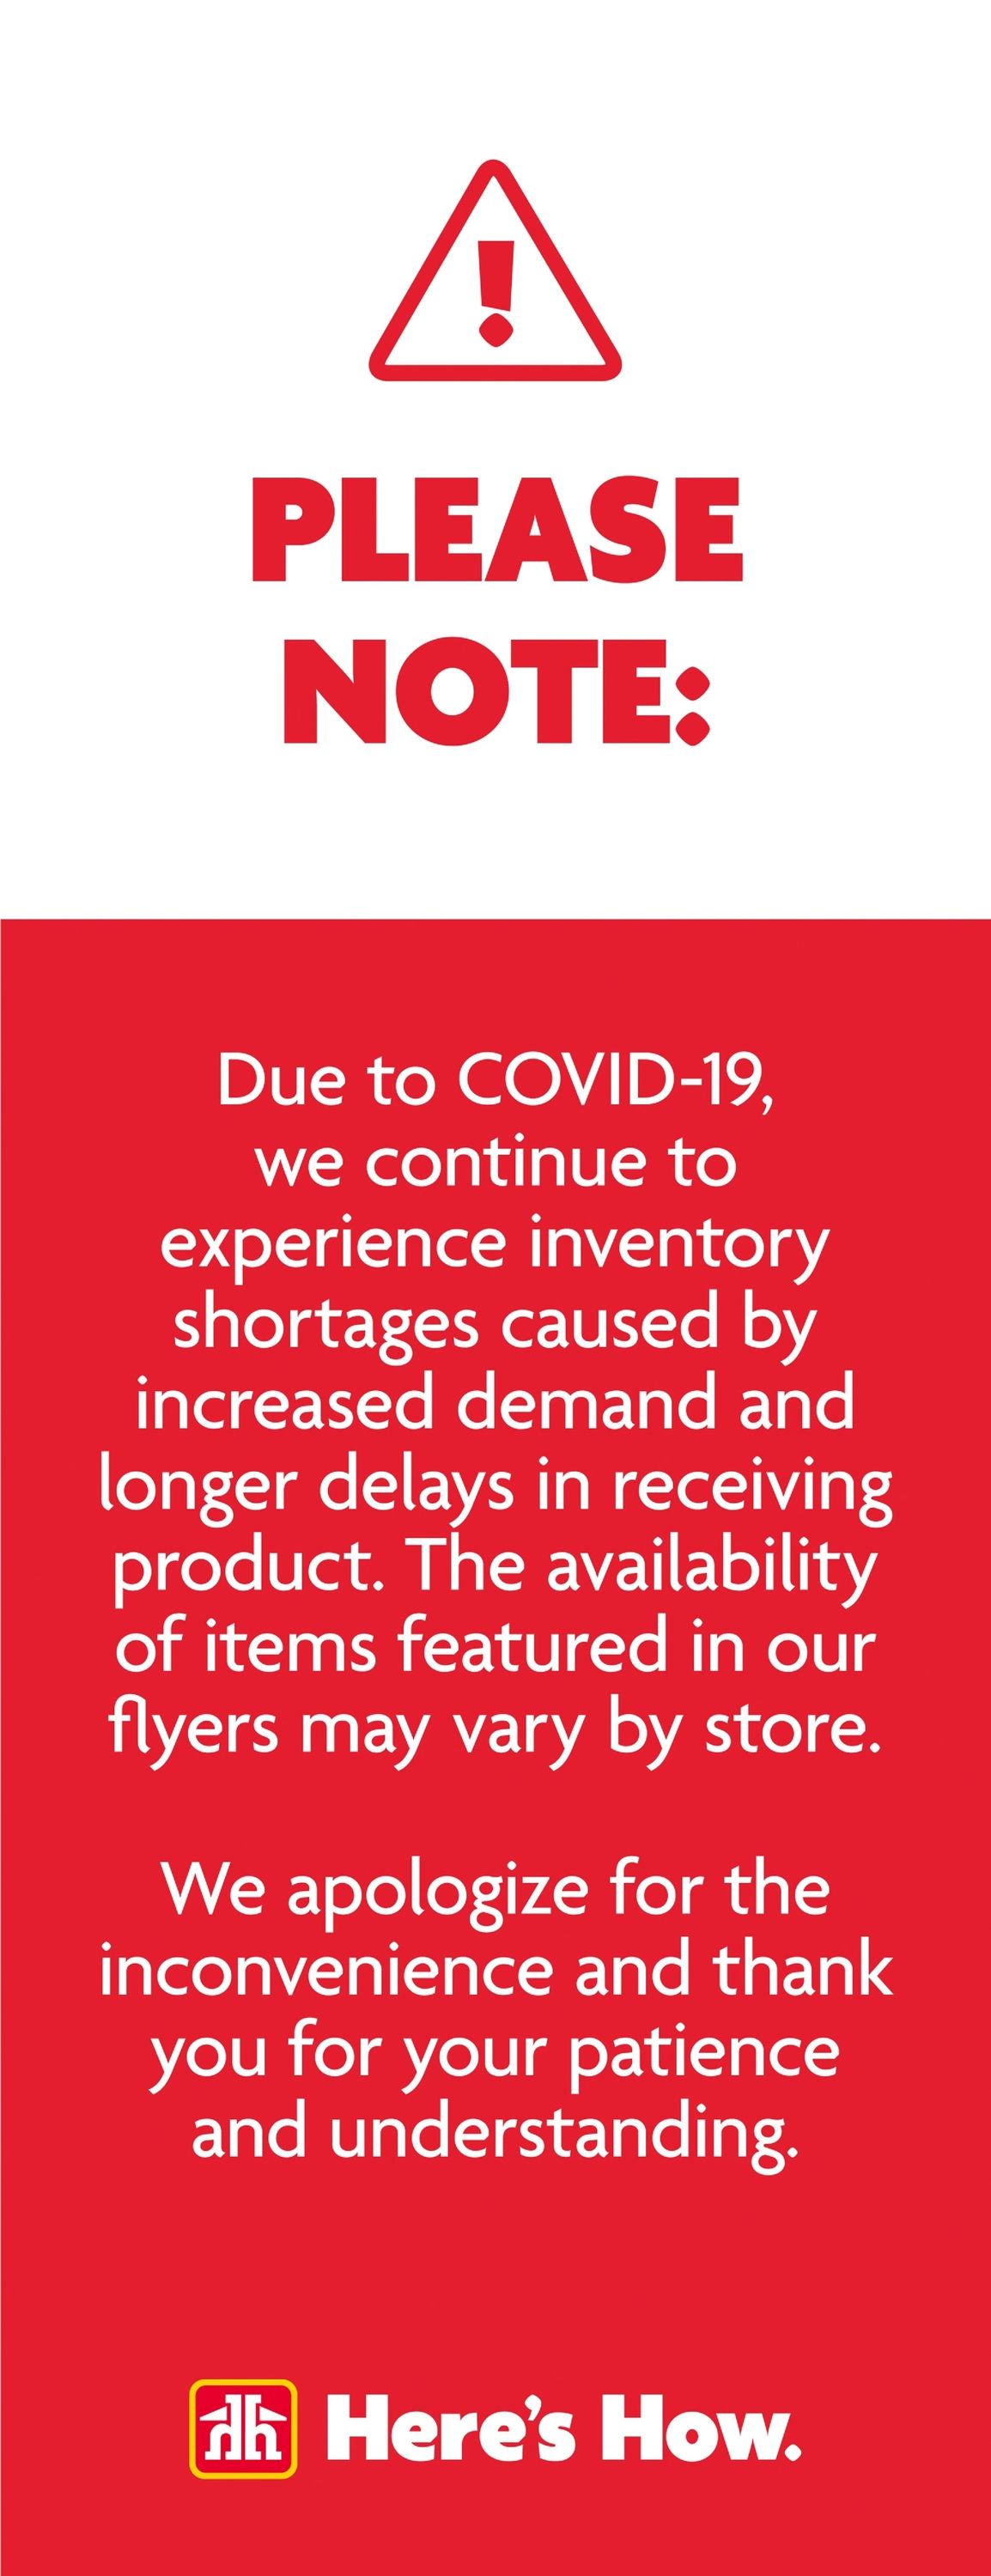 Home Hardware Flyer from 05/26/2022